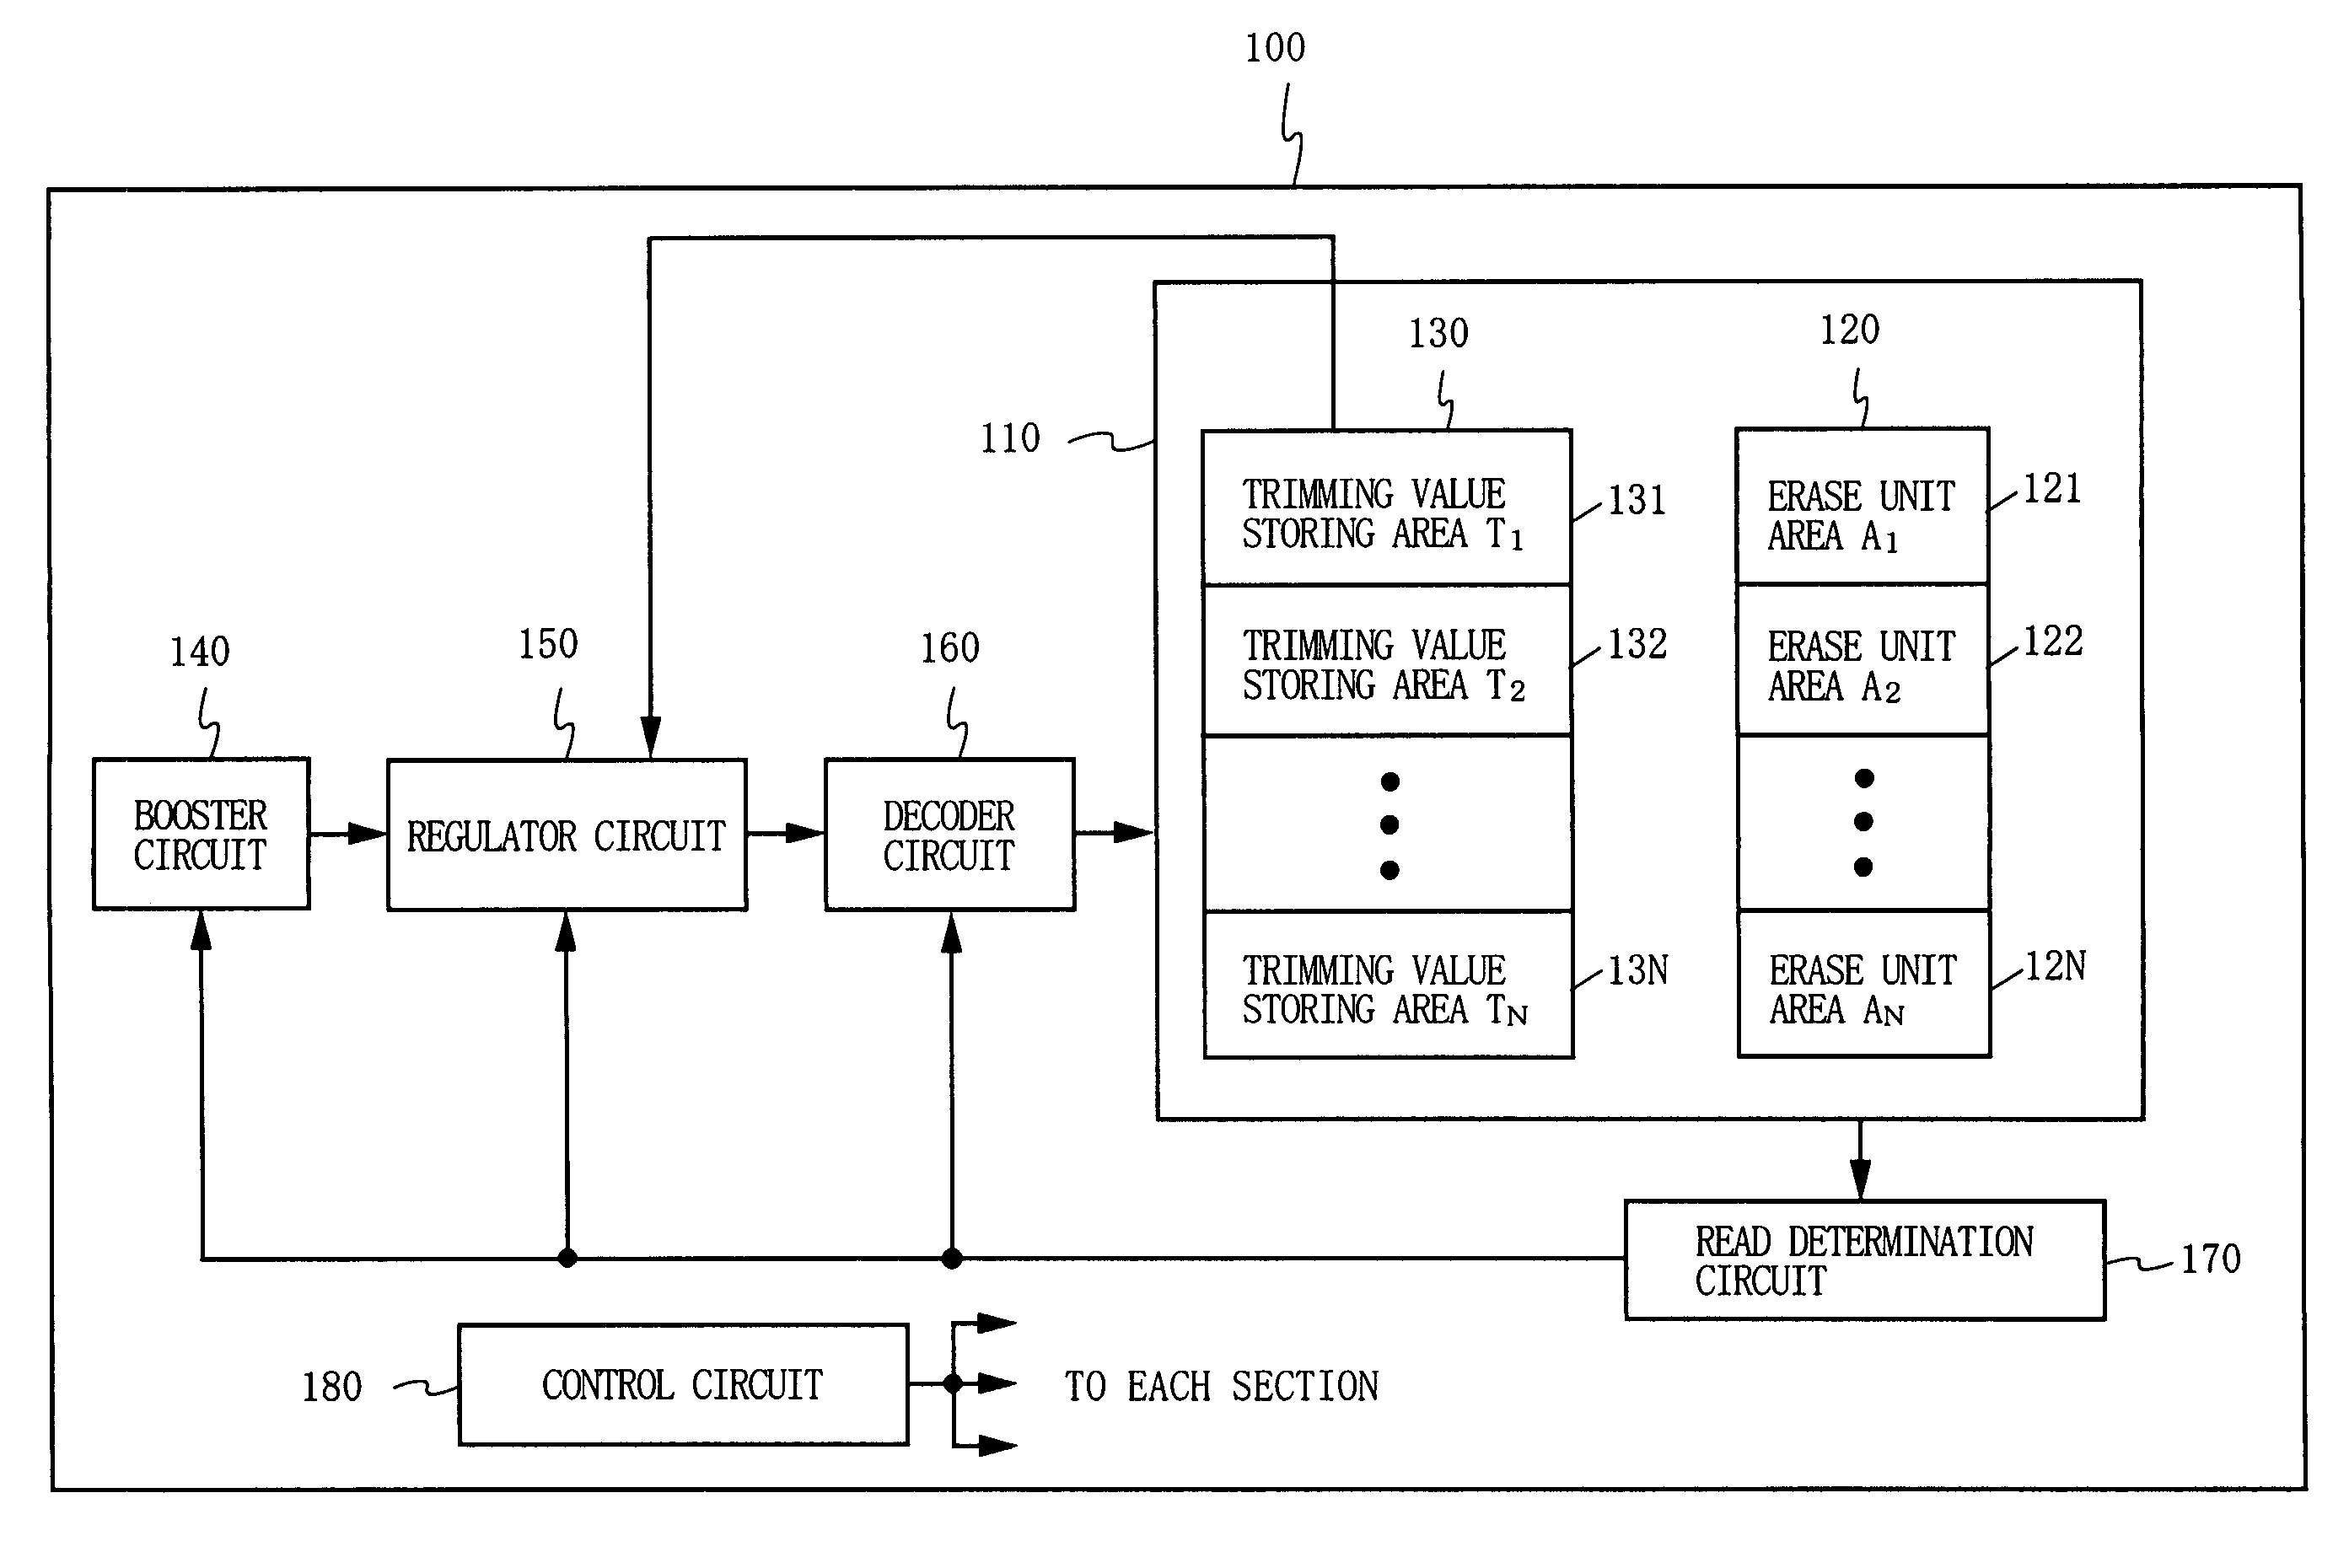 Non-volatile memory device with threshold voltage control function